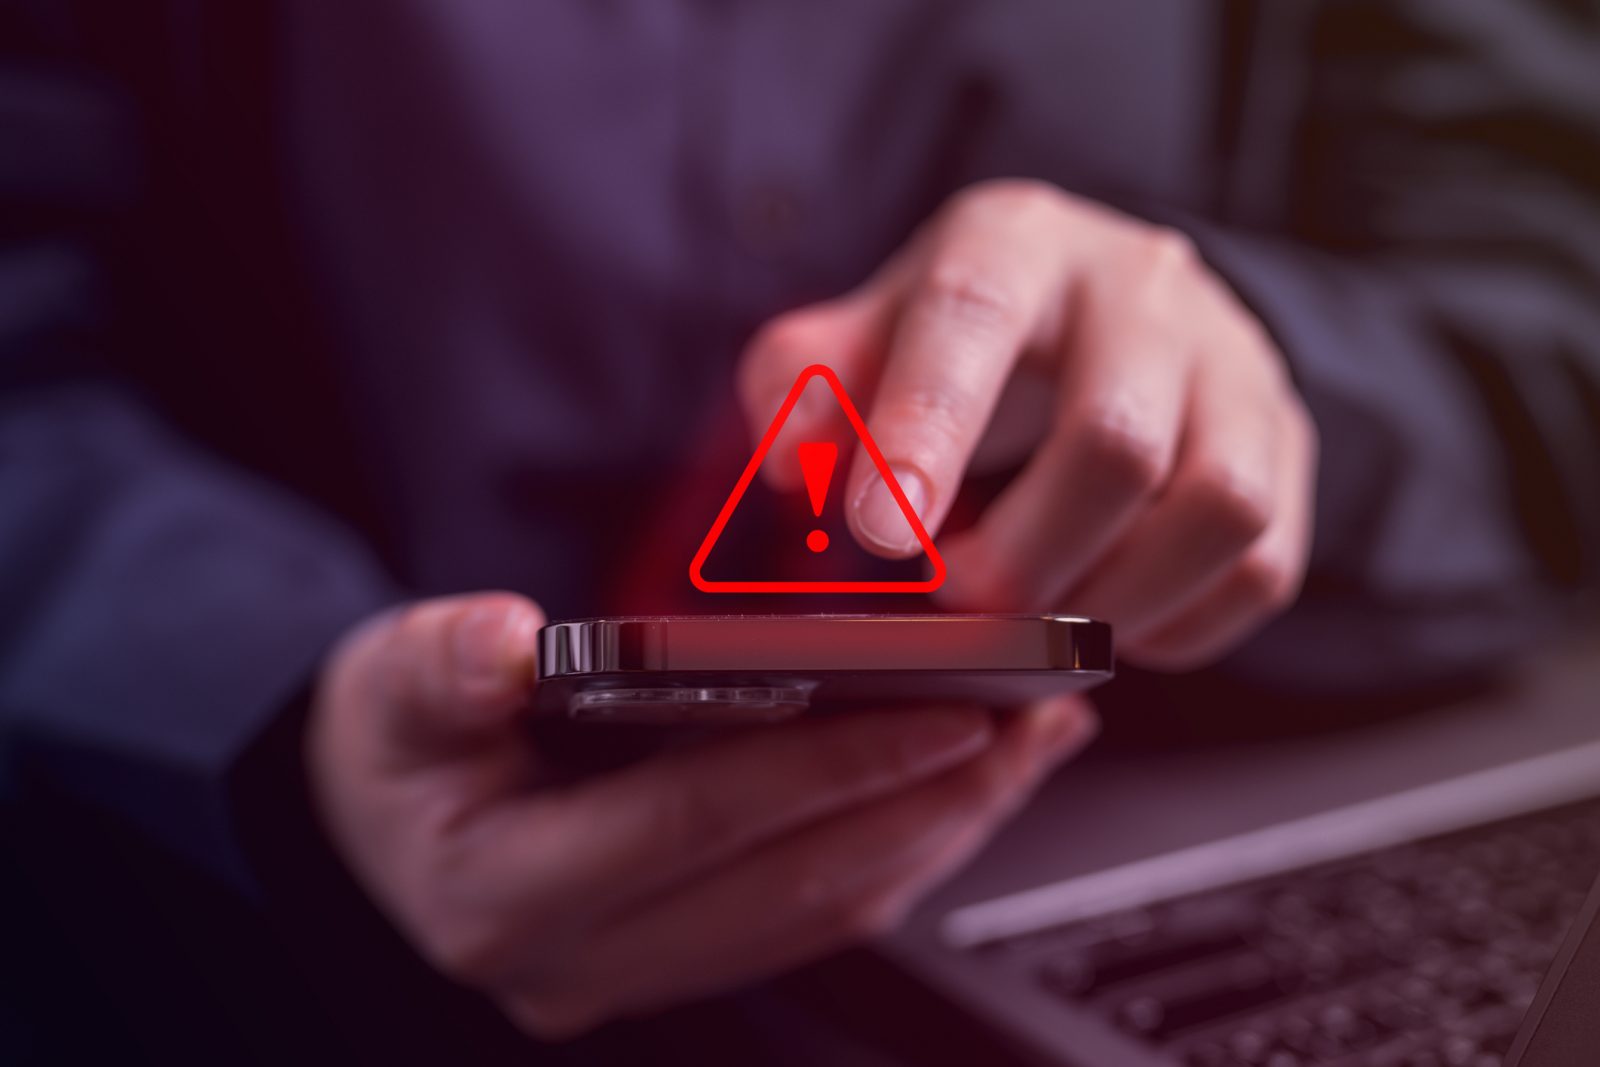 Hands holding a mobile phone with red warning icon hovering over it.